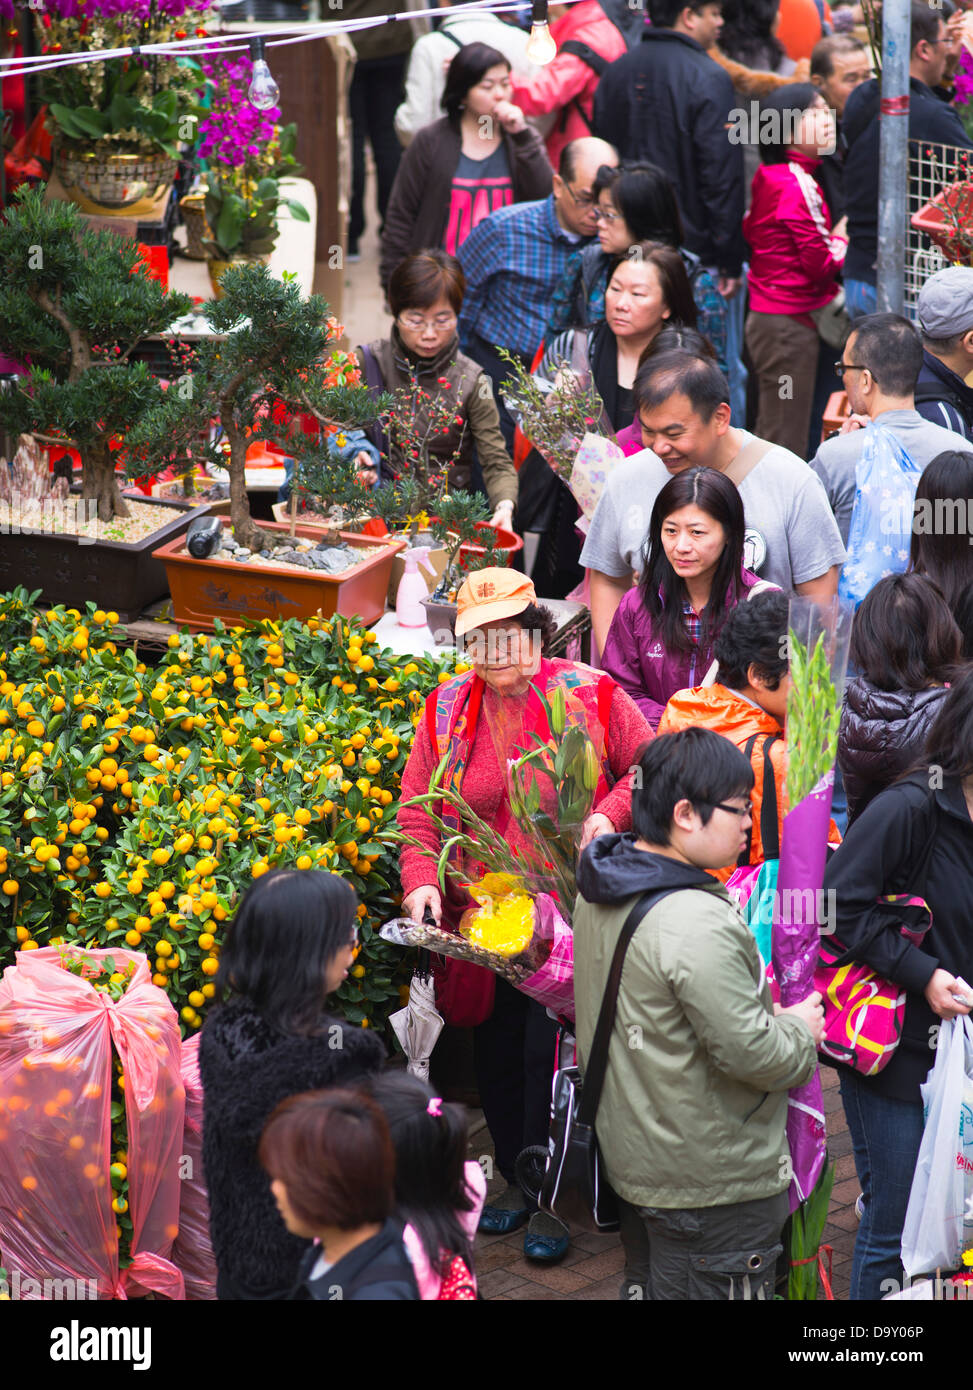 dh Flower Market MONG KOK HONG KONG People crowd in street market Chinese New Year flowers crowded scene busy crowds mongkok Stock Photo